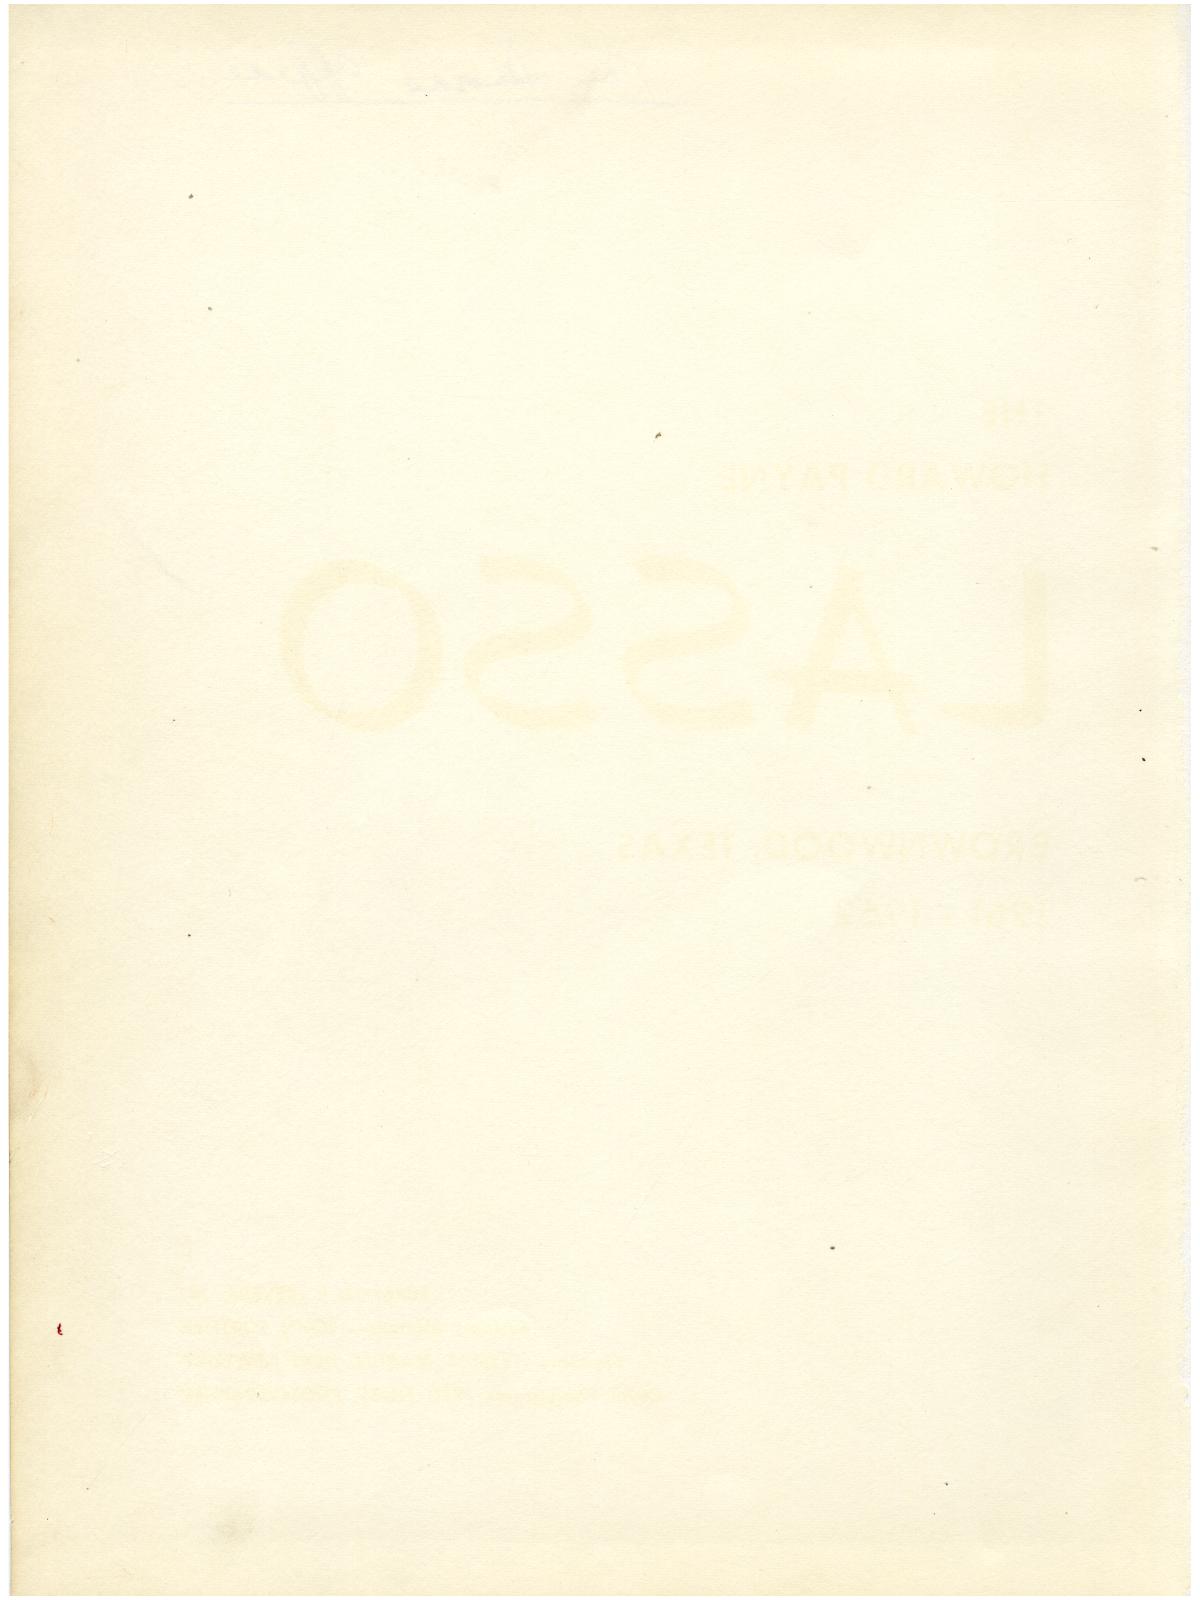 The Lasso, Yearbook of Howard Payne College, 1962
                                                
                                                    Front Inside
                                                